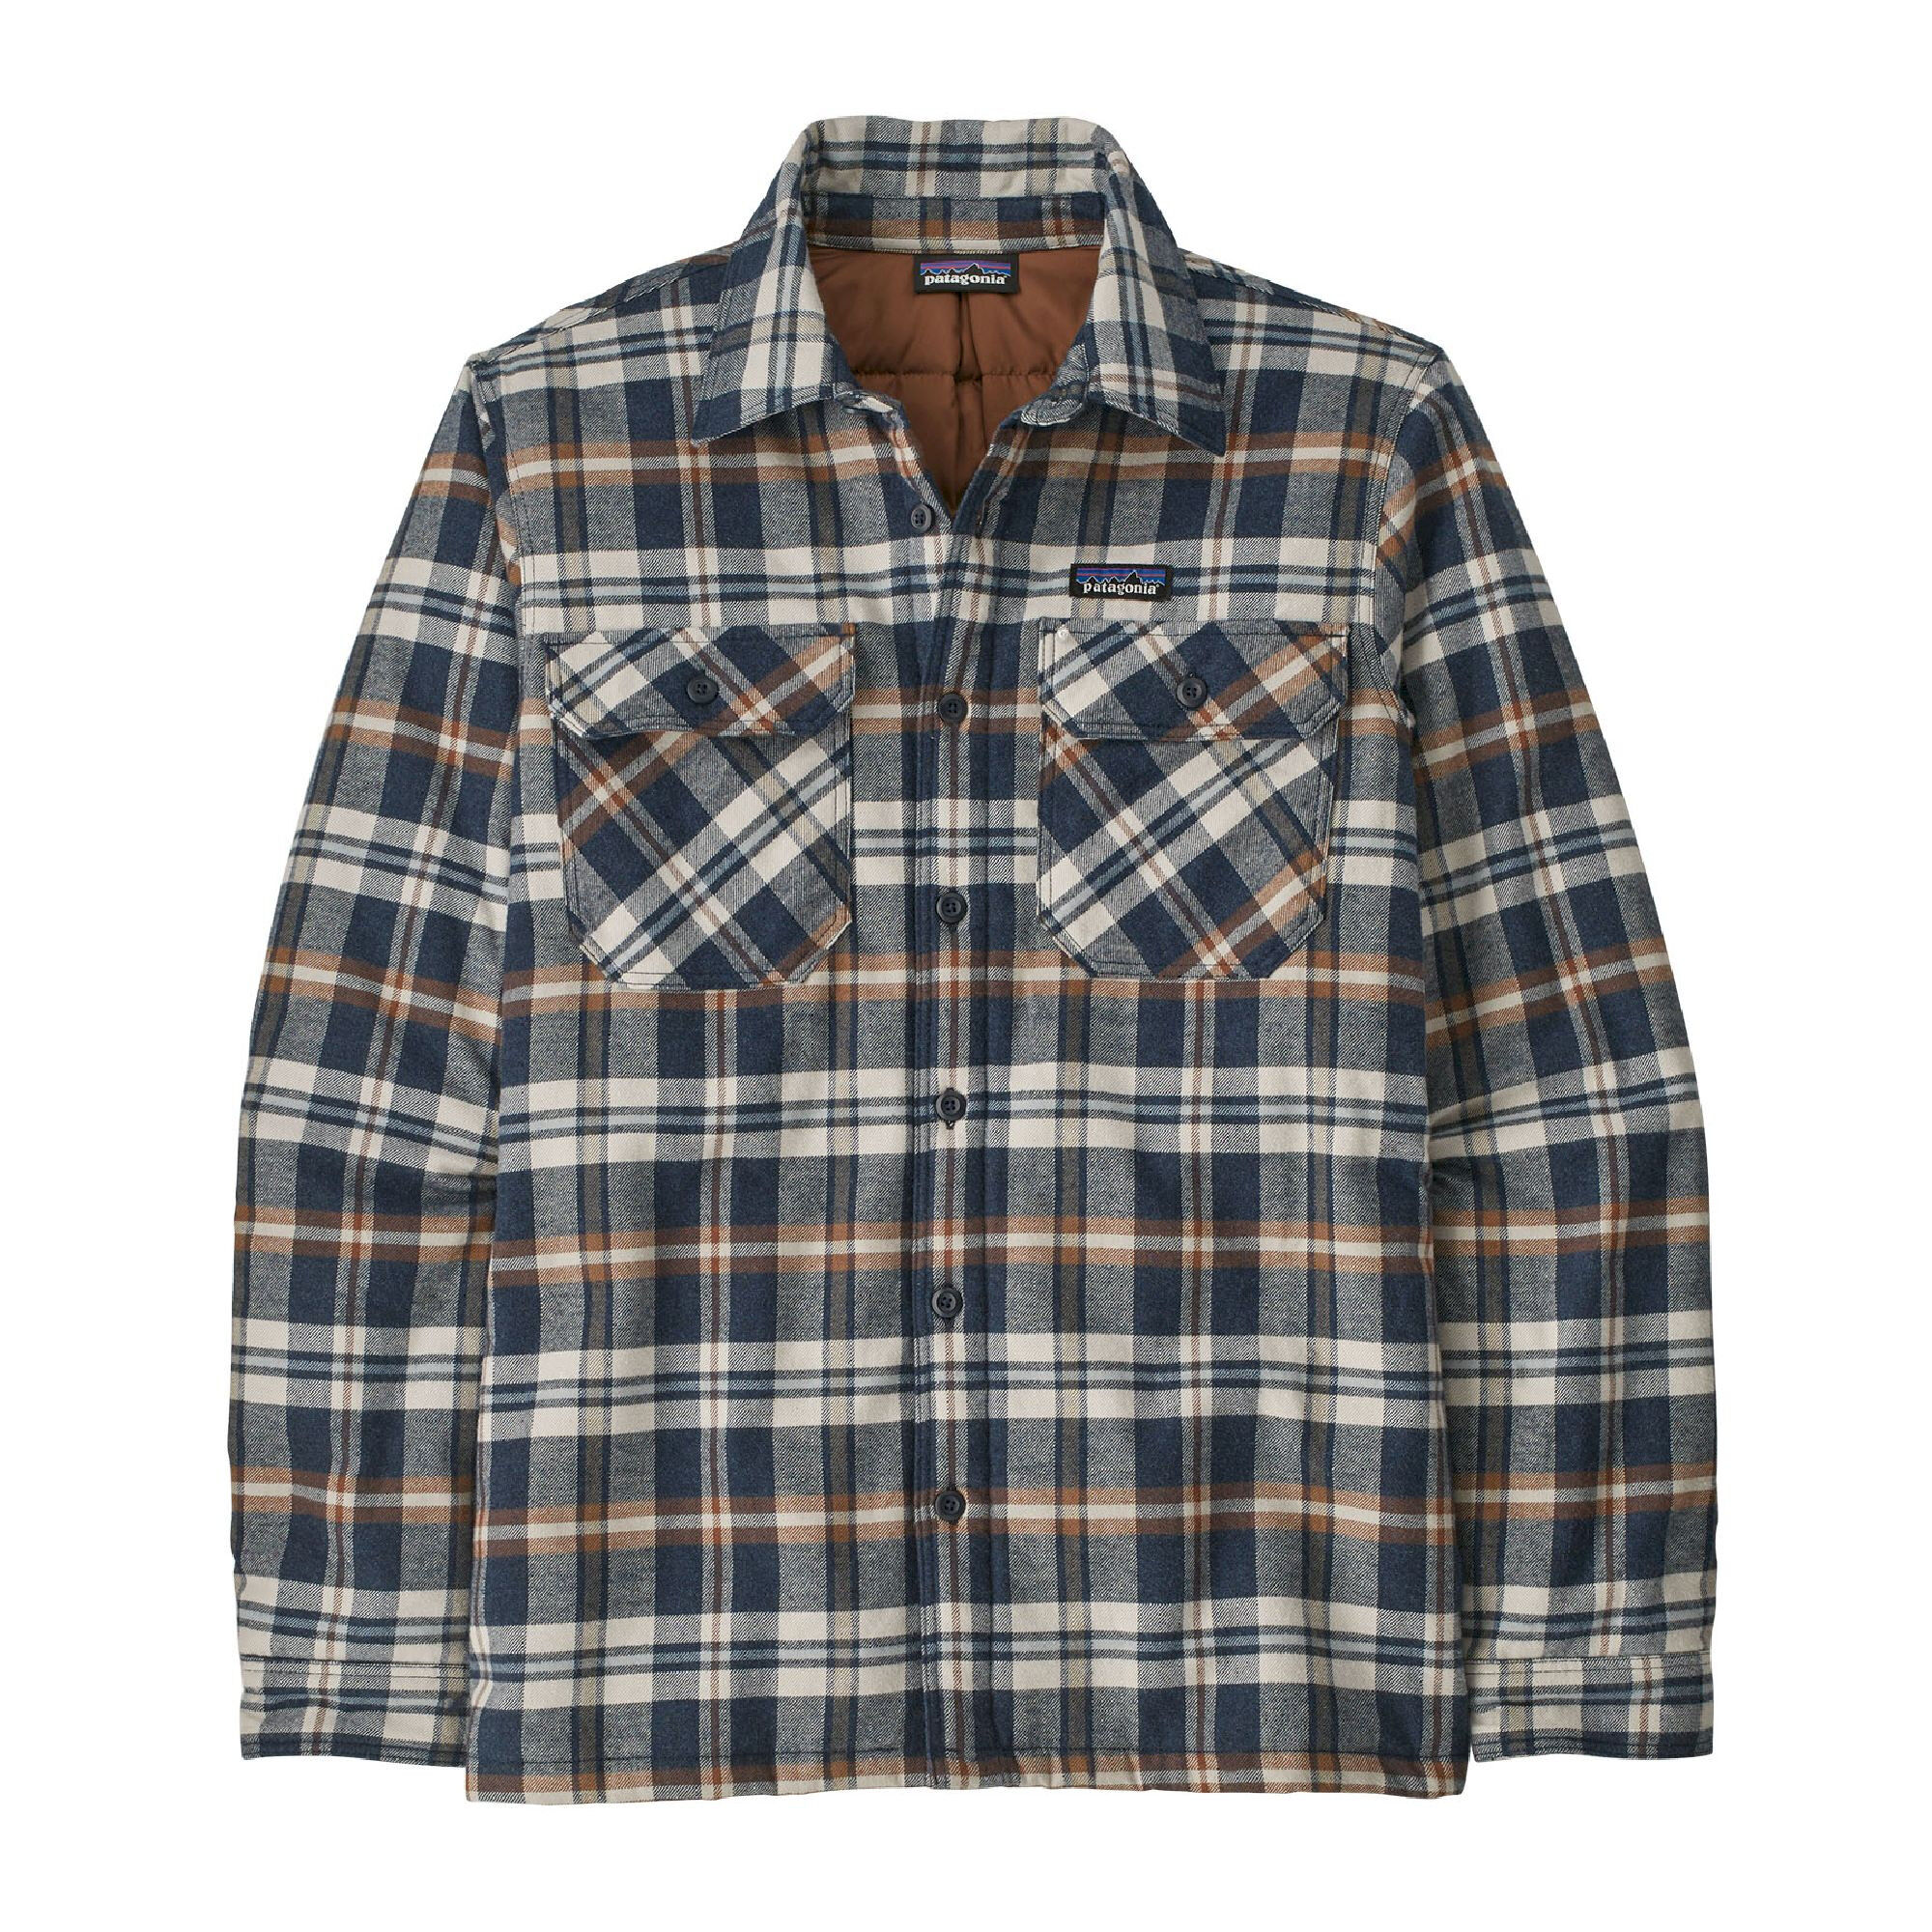 Patagonia Insulated Organic Cotton MW Fjord Flannel Shirt - Overhemd - Heren